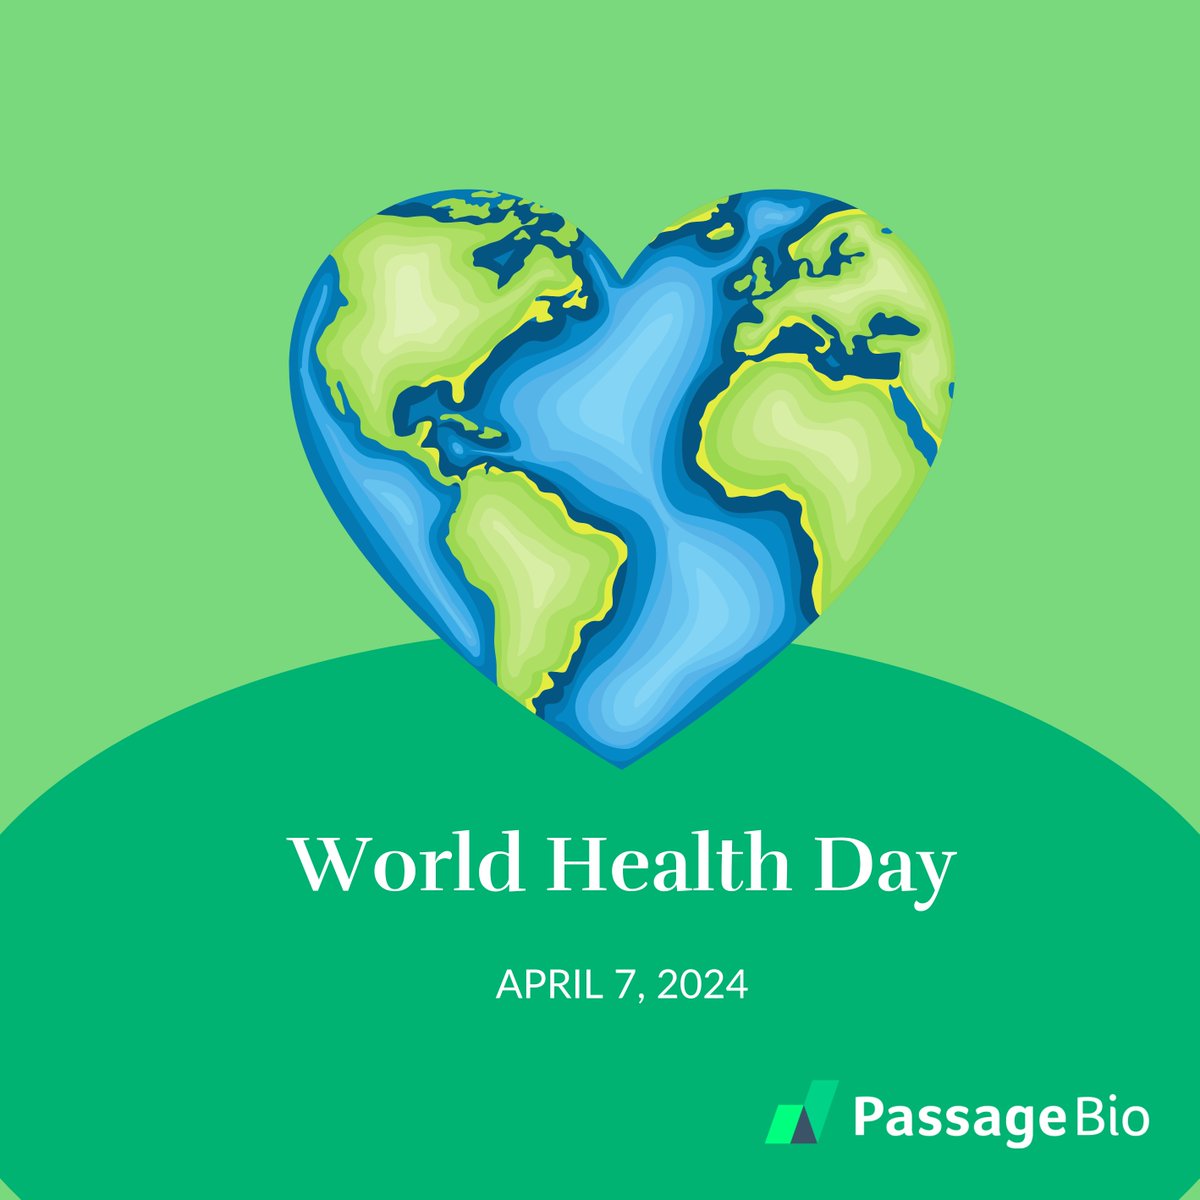 In recognition of #WorldHealthDay, Passage Bio is highlighting the importance of health equity and building healthier communities. We are constantly inspired by our peers and the progress they are making. Learn more: loom.ly/FpLi6Aw #HealthForAll #MyHealthMyRight